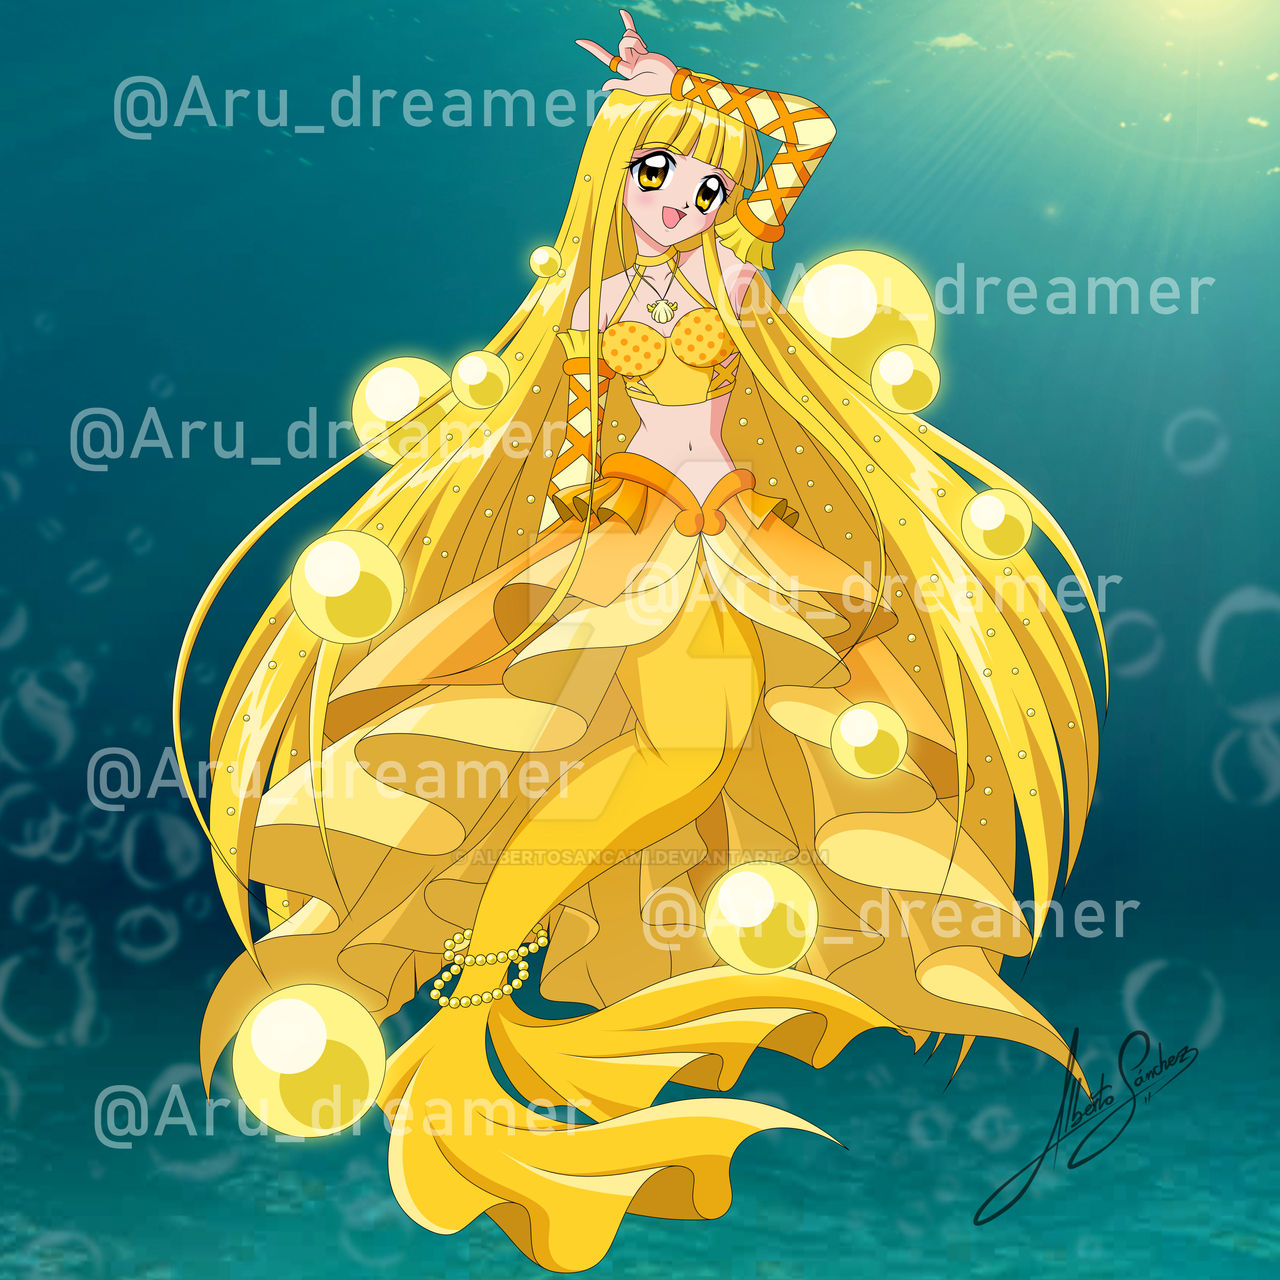 Mermaid Melody Coco (Commission) by AlbertoSanCami on DeviantArt